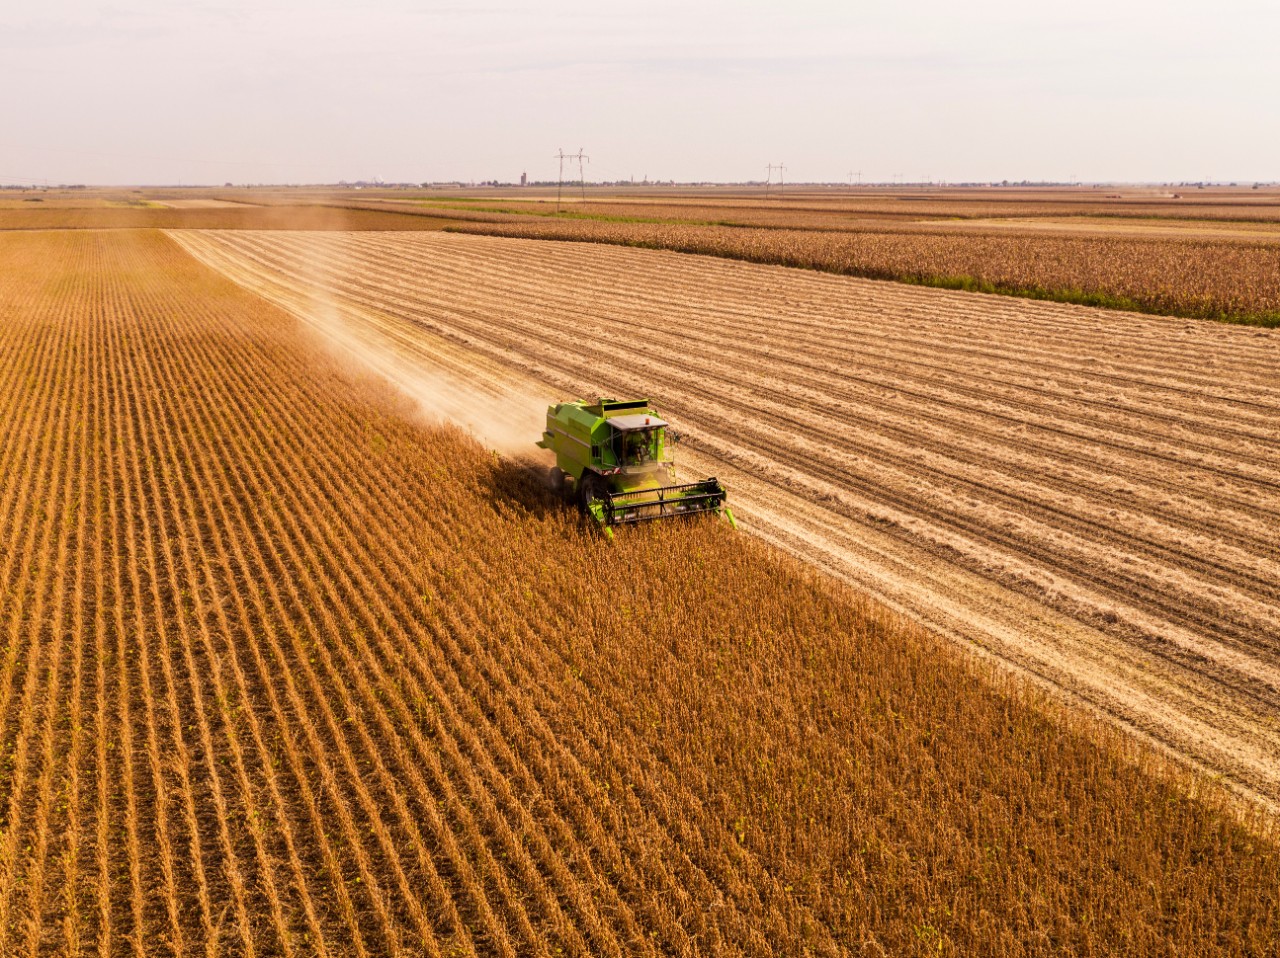 Serbia, Vojvodina. Farmer in combine harvester on a field of soybean, aerial view.